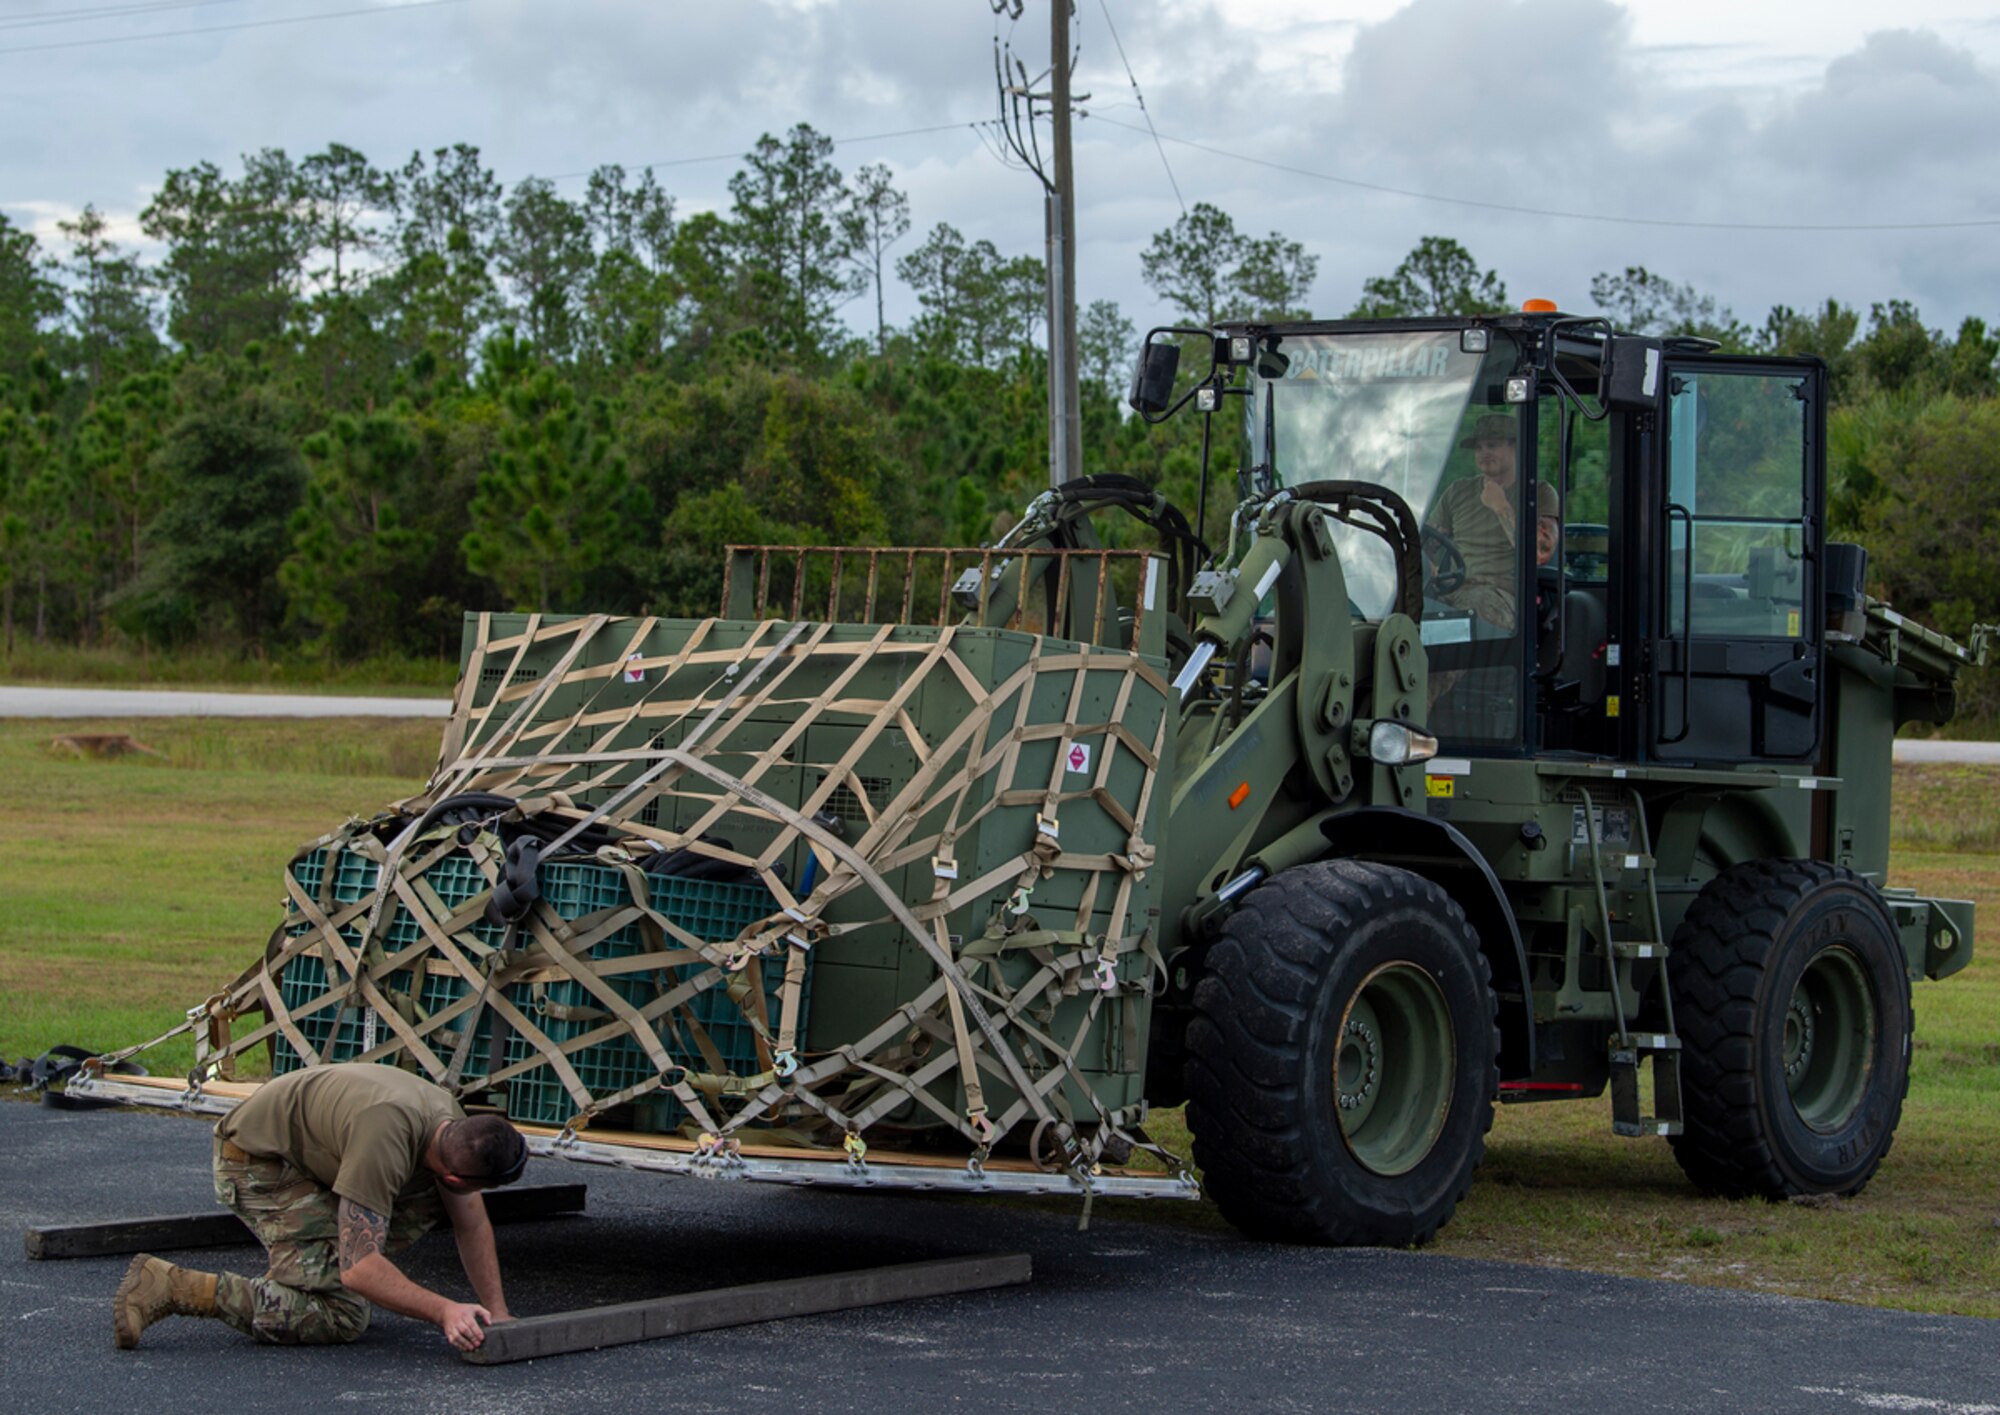 Mosaic Tiger participants move cargo at Avon Park Air Force Range, Florida, Nov. 13, 2023. Several structures must be constructed quickly and efficiently to support operations, including a command and control tent and field kitchen. (U.S. Air Force photo by Airman 1st Class Leonid Soubbotine)